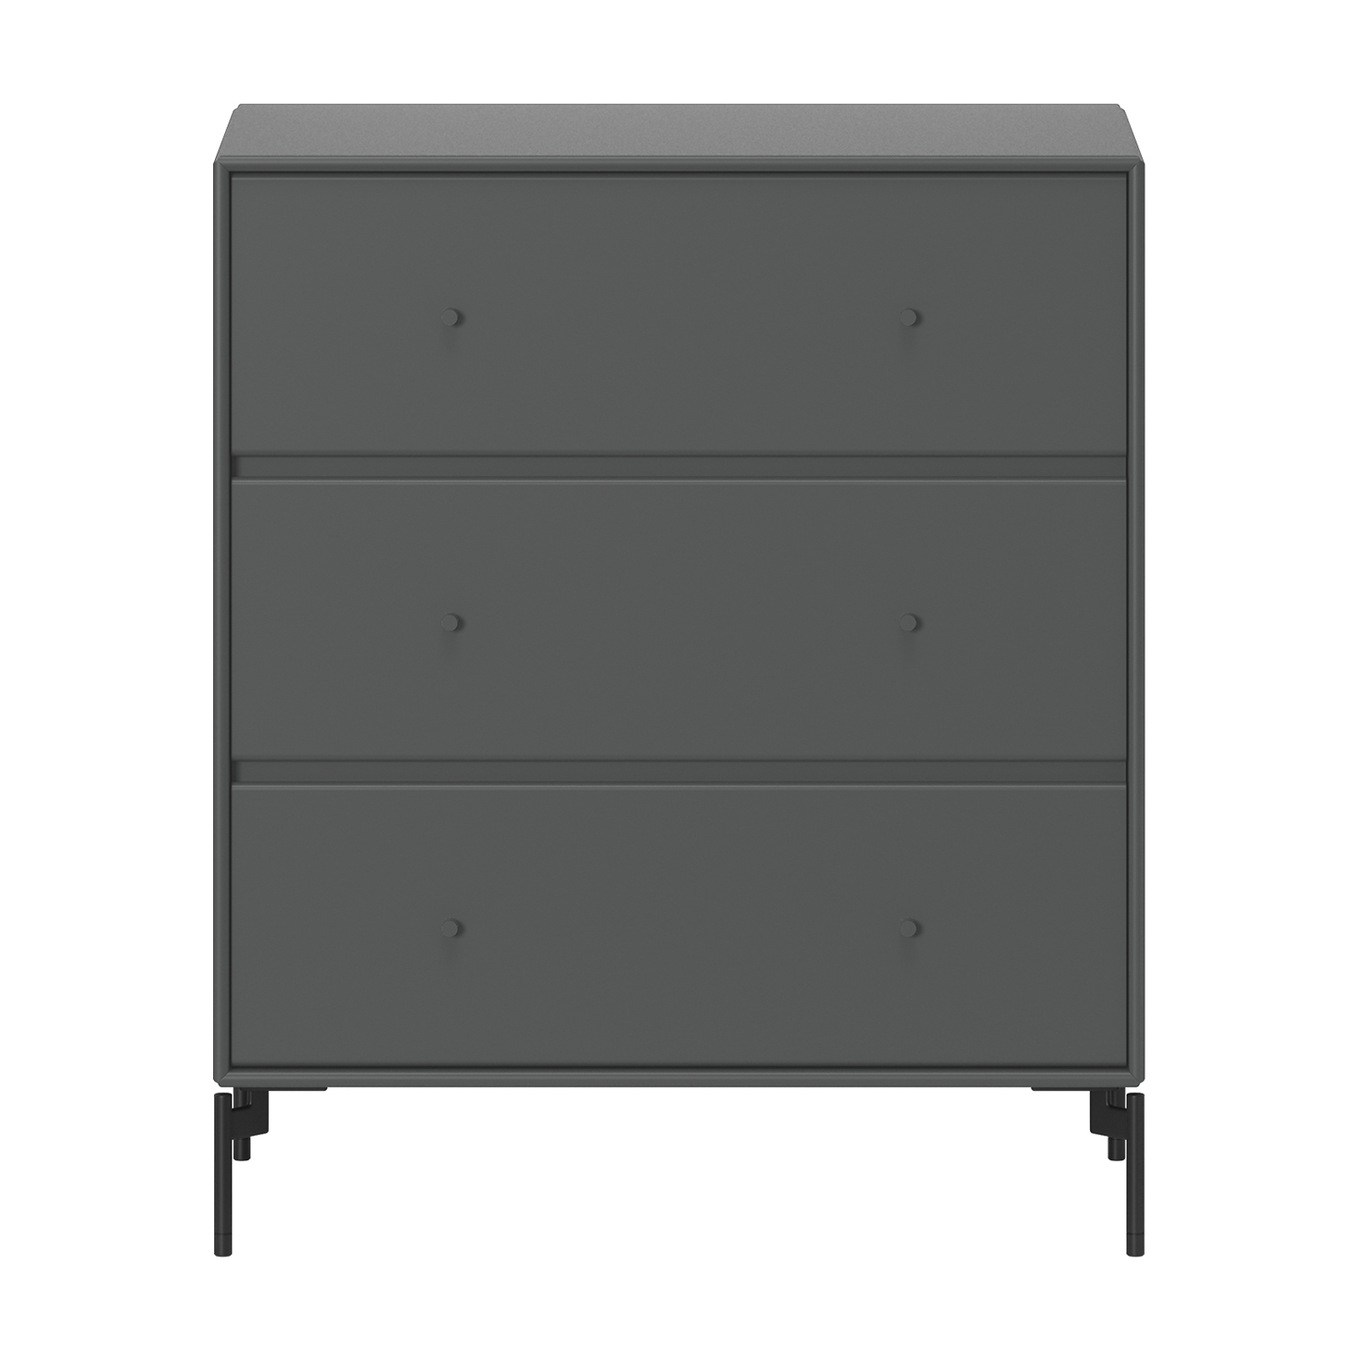 Carry Chest Of Drawers, Anthracite